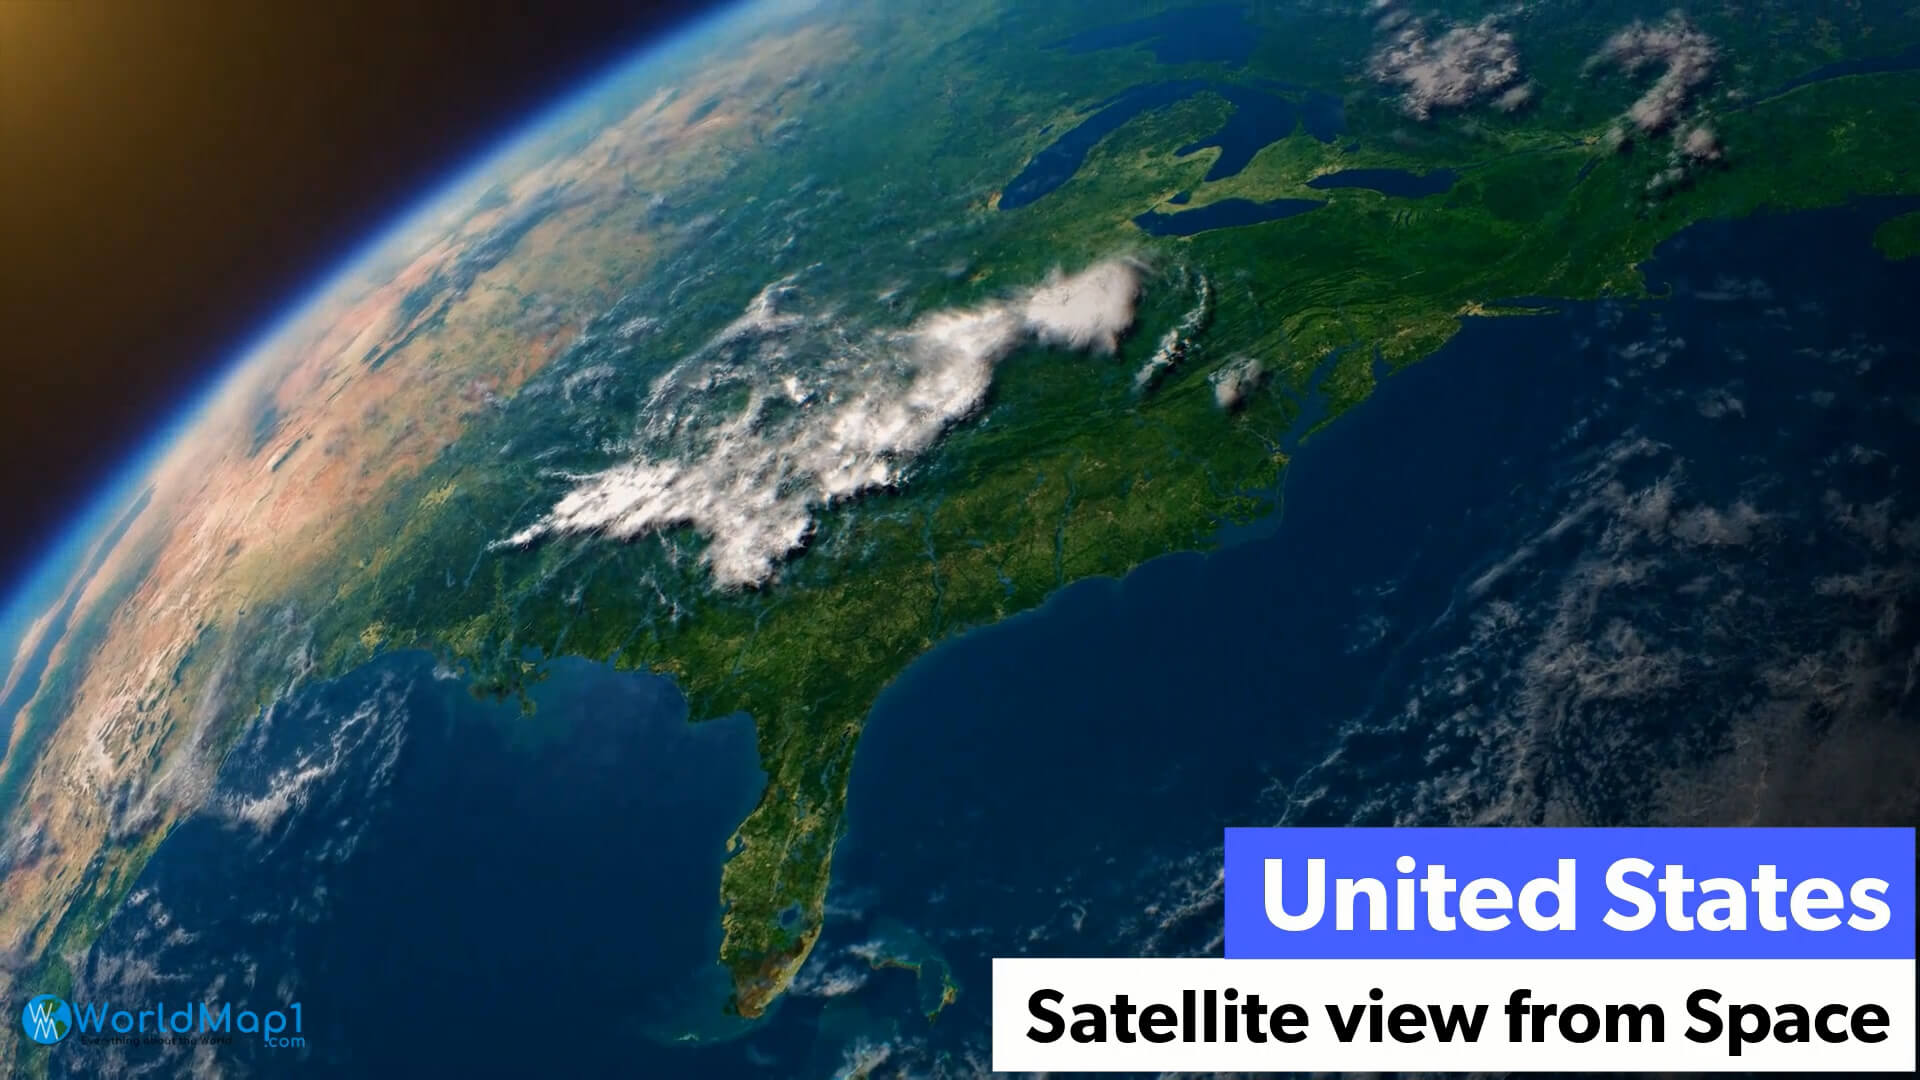 Eastern United States from Space